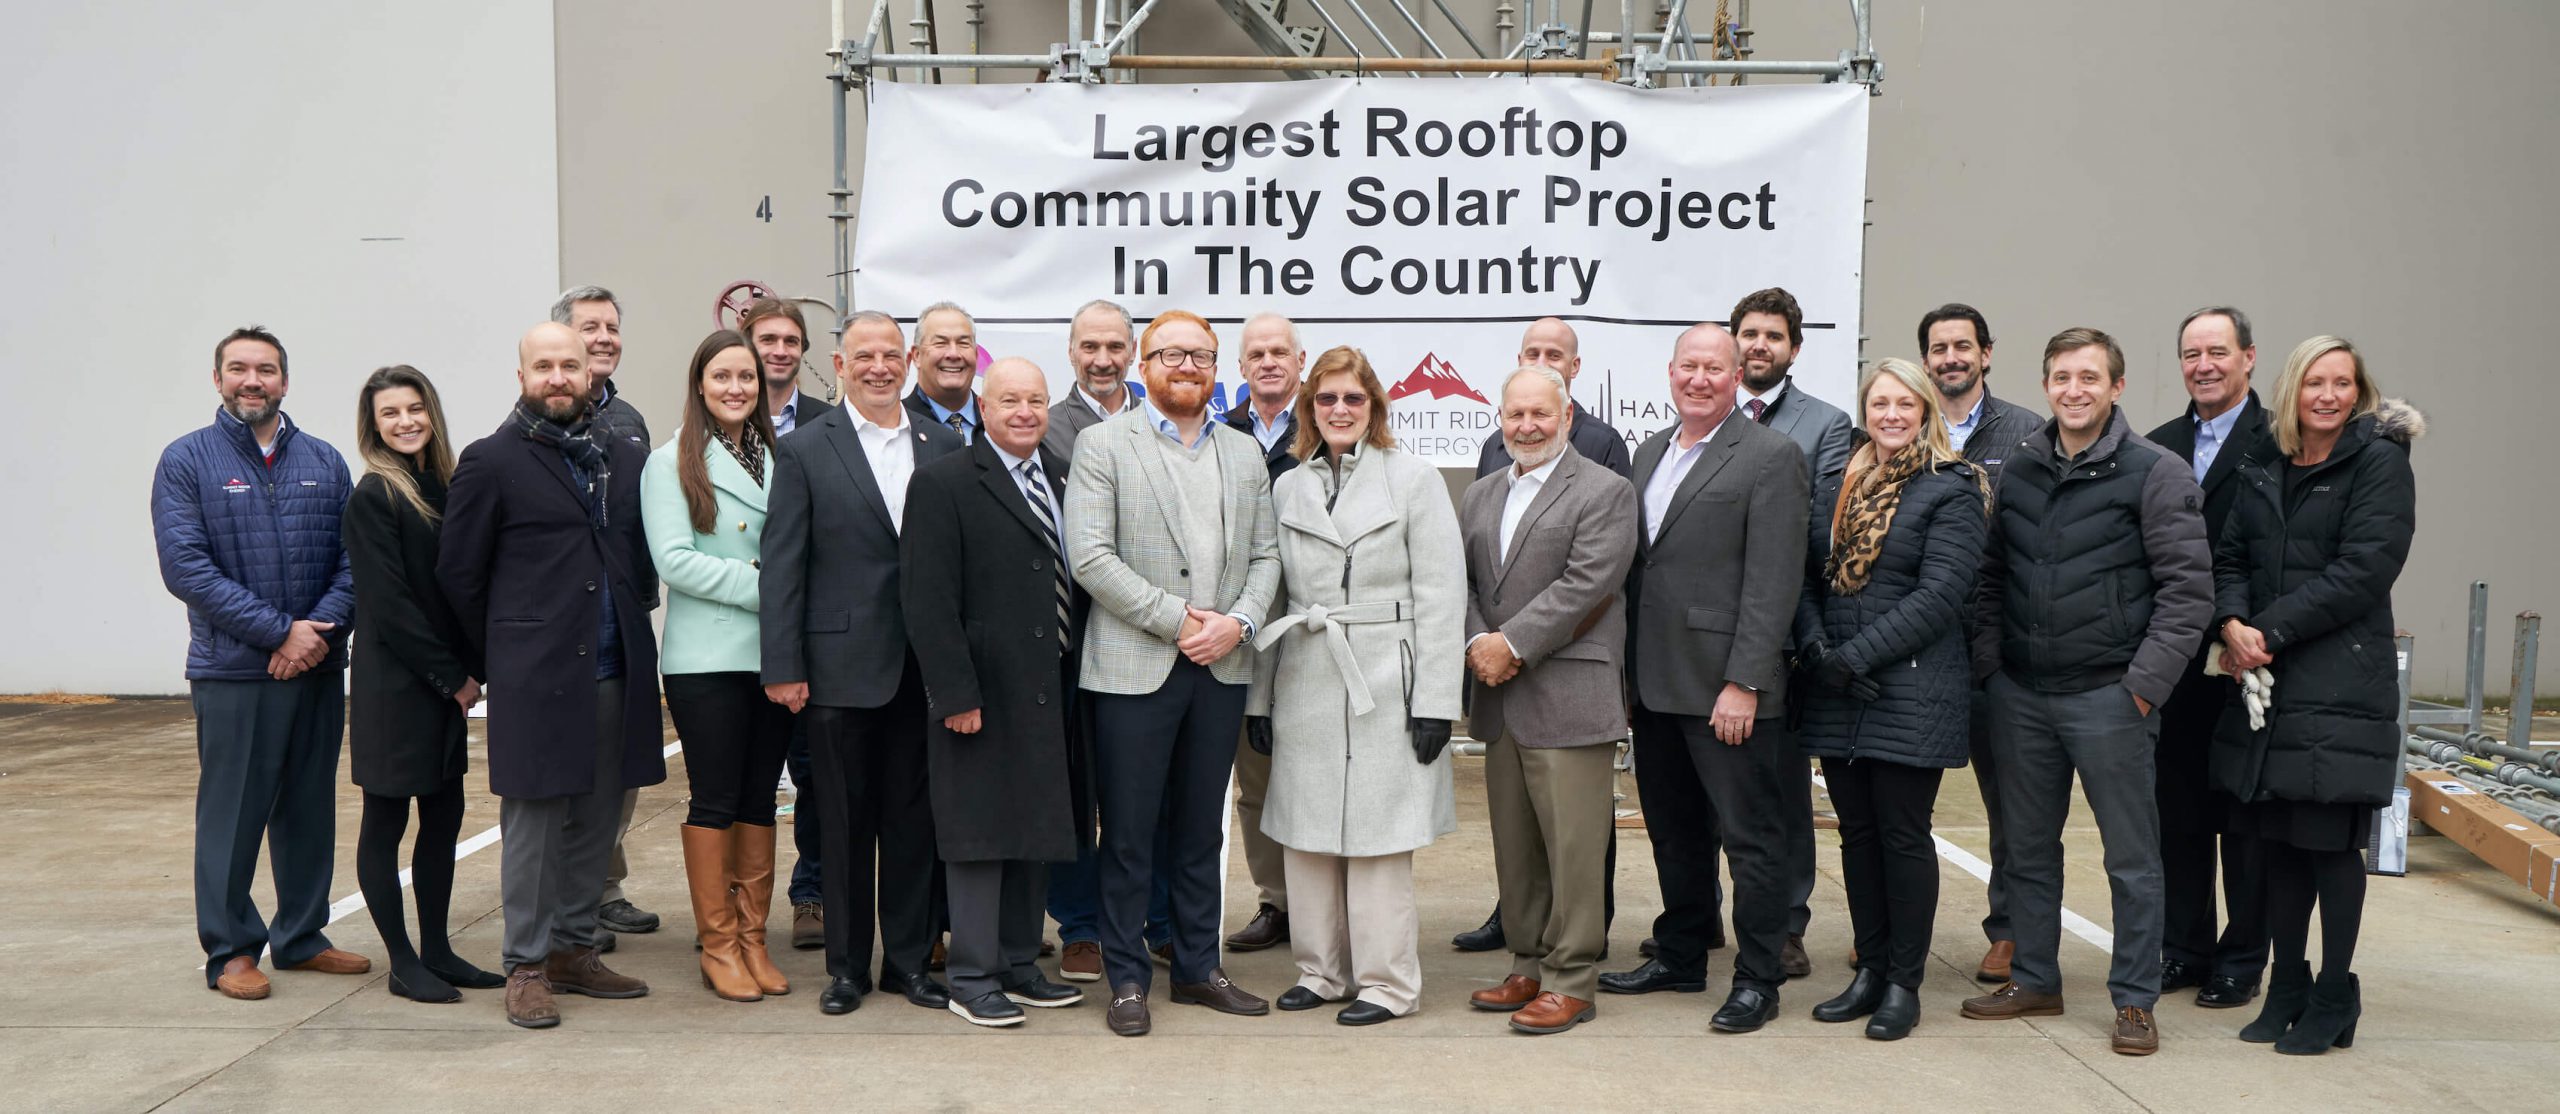 SRE and OGUSA to deliver 120 MW of community solar capacity to Maine customers